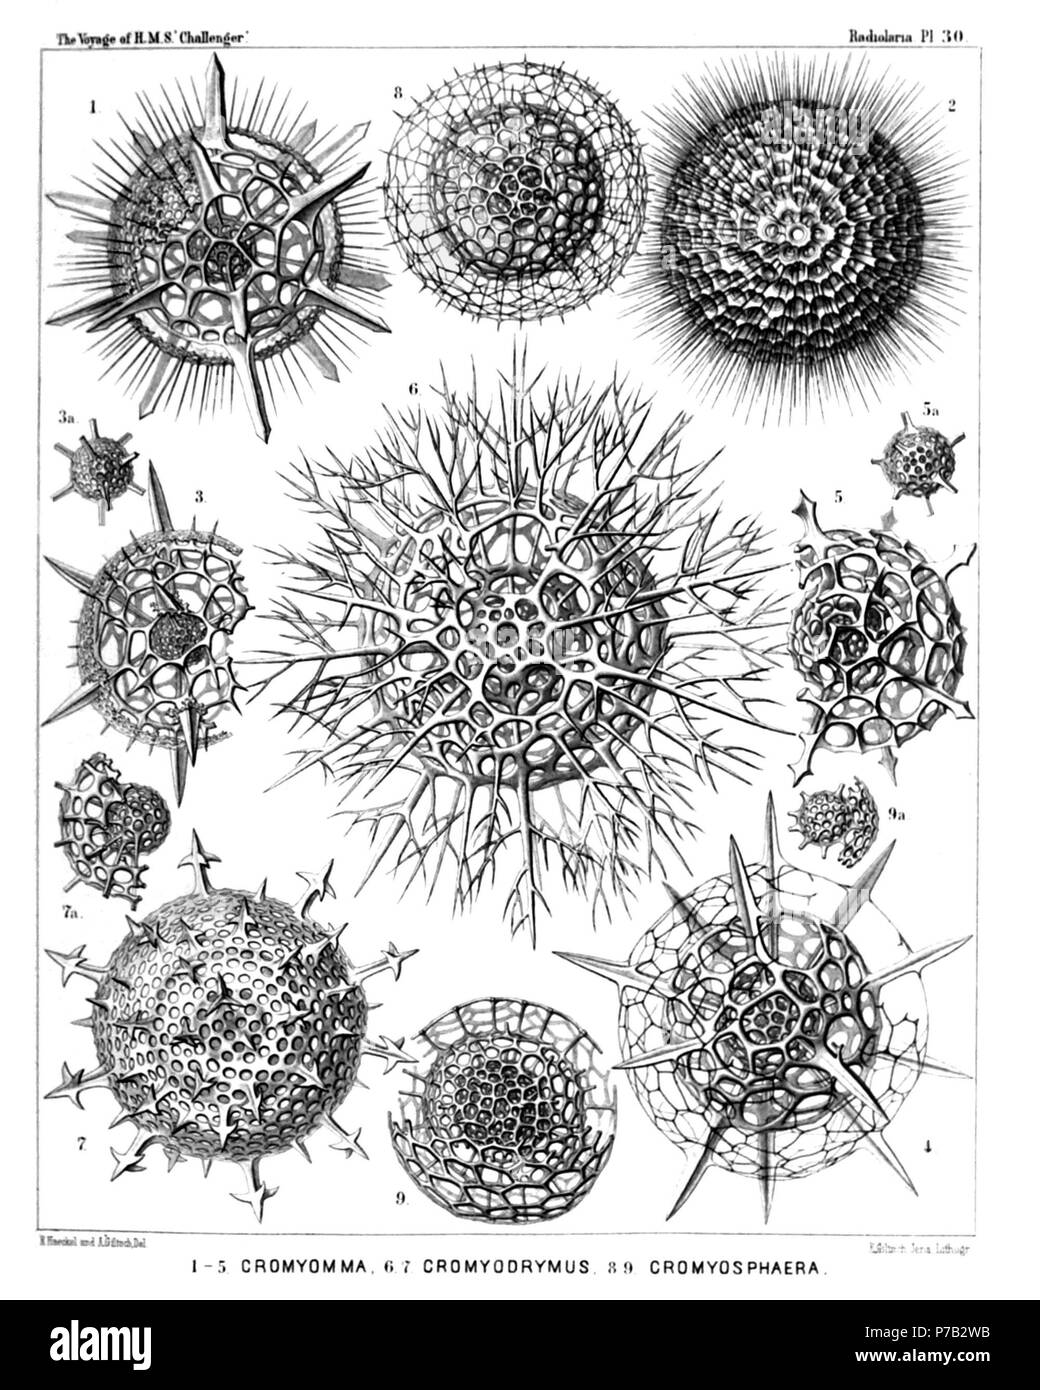 English: Illustration from Report on the Radiolaria collected by H.M.S. Challenger during the years 1873-1876. Part III. Original description follows:  Plate 30. Liosphærida et Astrosphærida.  Diam.  Fig. 1. Cromyechinus icosacanthus, n. sp., × 300  Fig. 2. Cromyomma villosum, n. sp., × 300  Fig. 3. Cromyechinus dodecacanthus, n. sp., × 400  Fig. 3a. The innermost shells.  Fig. 4. Cromyomma circumtextum, n. sp., × 300  Fig. 5. Cromyomma mucronatum, n. sp., × 200  Fig. 5a. The innermost shells.  Fig. 6. Cromyodrymus abietinus, n. sp., × 300  Fig. 7. Cromyodrymus quadricuspis, n. sp., × 400  Fig Stock Photo